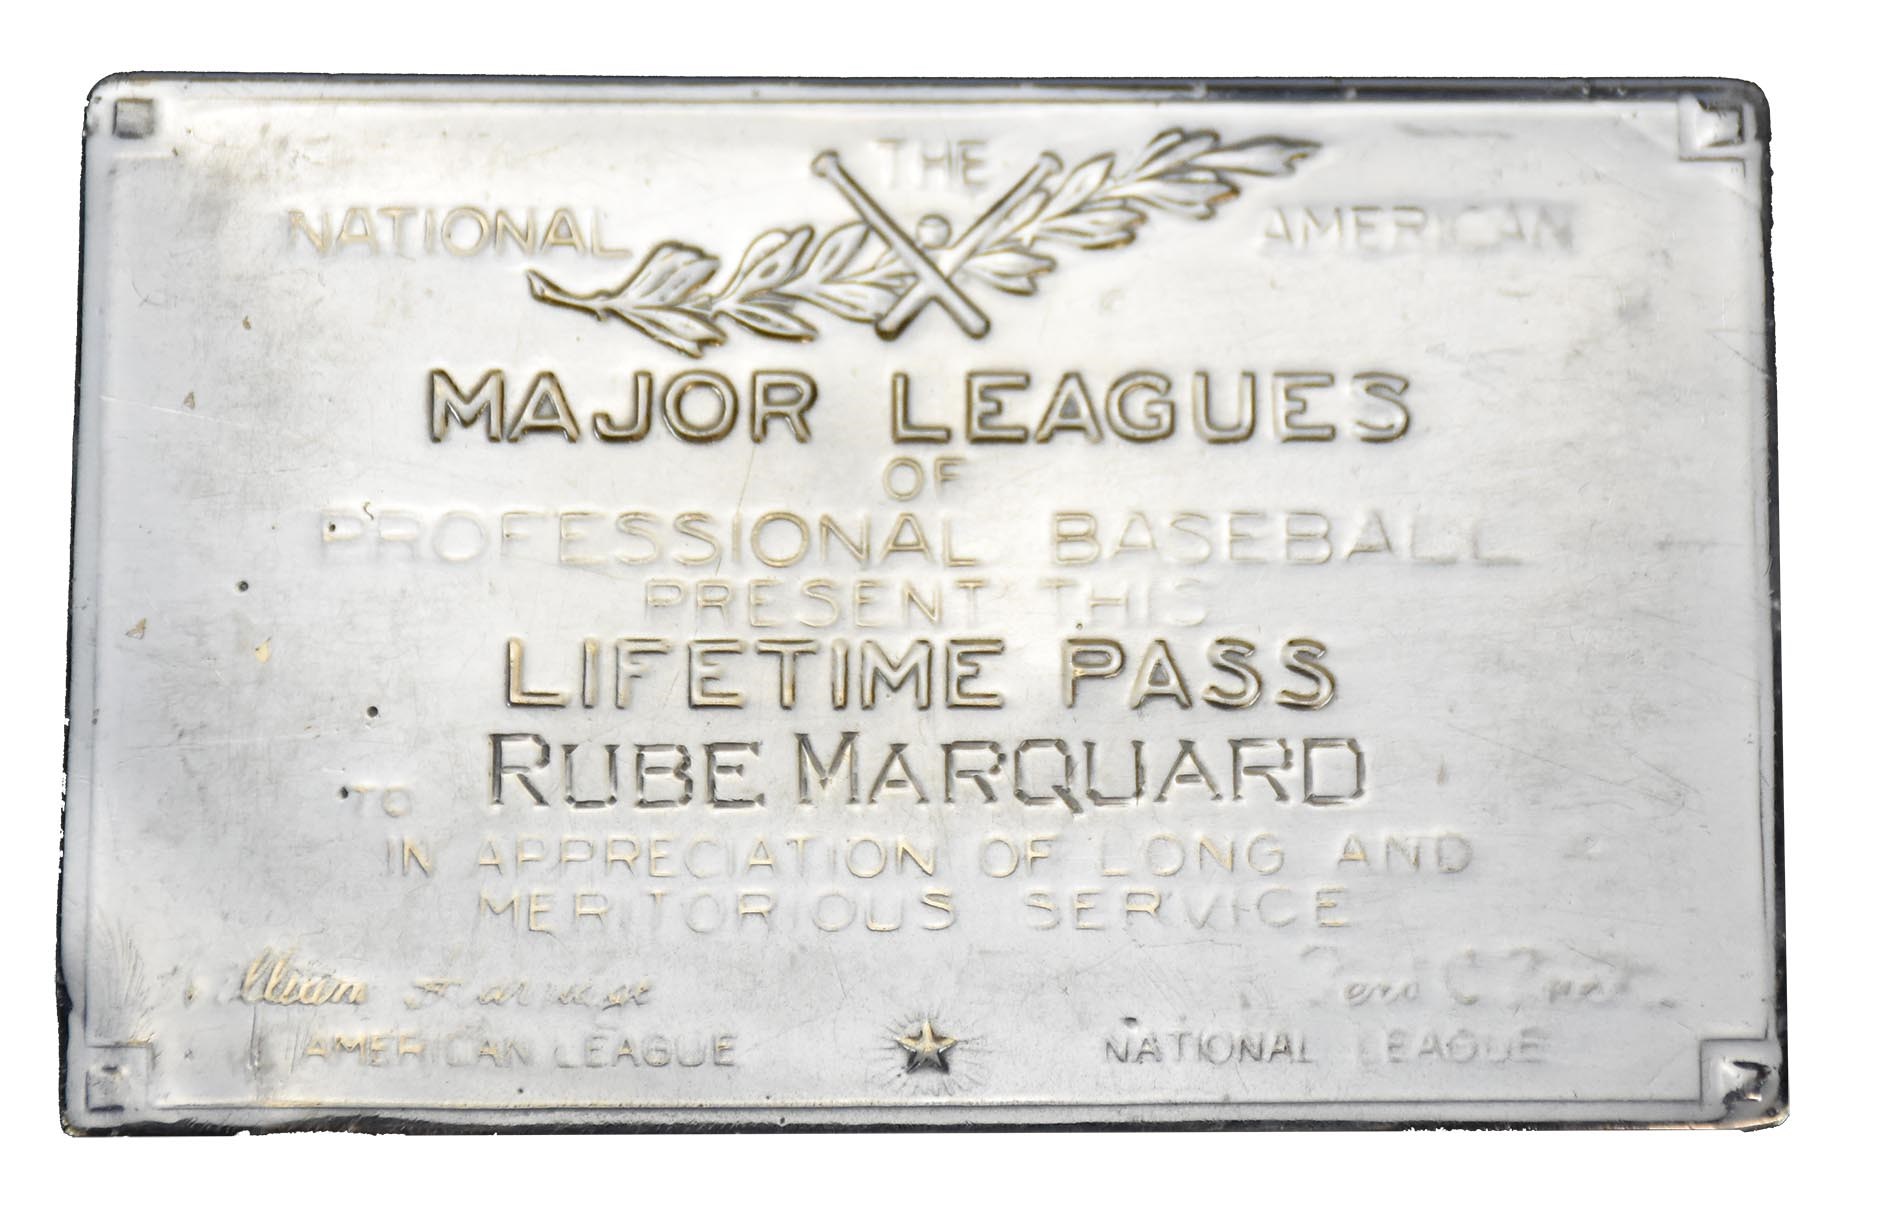 Sports Rings And Awards - Rube Marquard Major Leagues Lifetime Pass